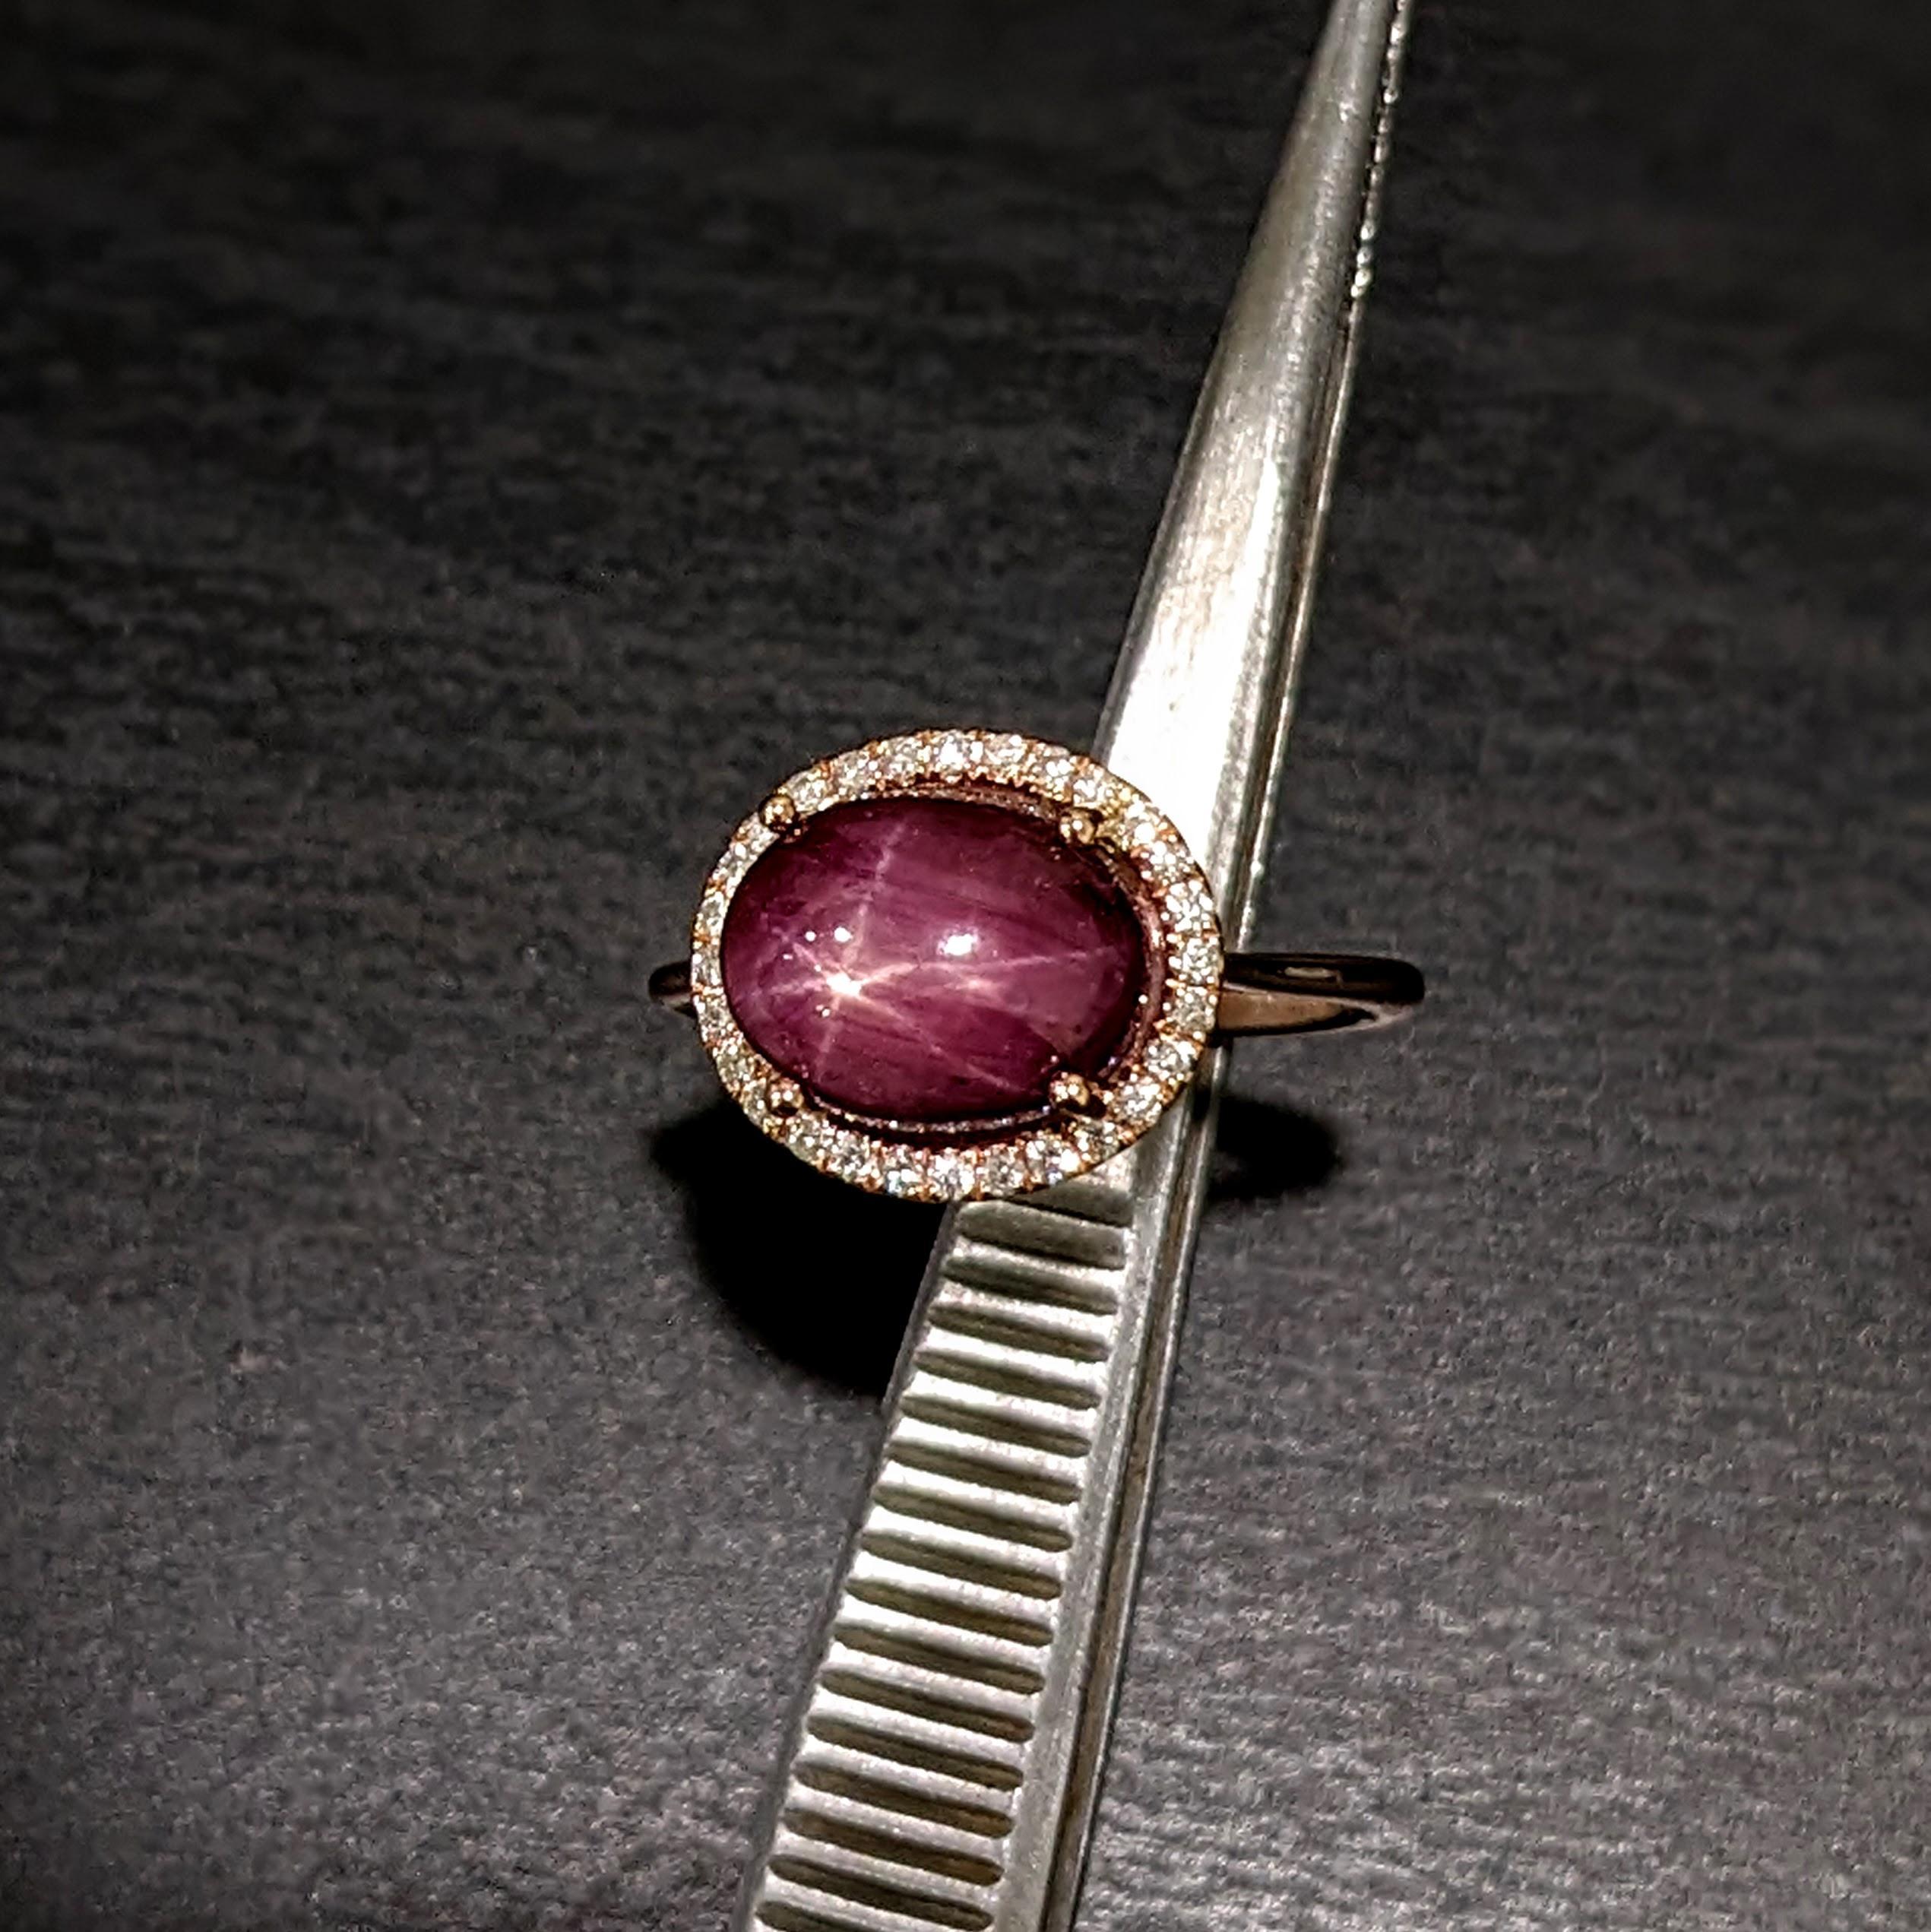 A star ruby is a type of gemstone that displays a six-rayed star when light is shone onto it. Star rubies are unique and mystical gemstones. This art deco east west oval star ruby ring features a stunning red 6.38ct star ruby in a single prong